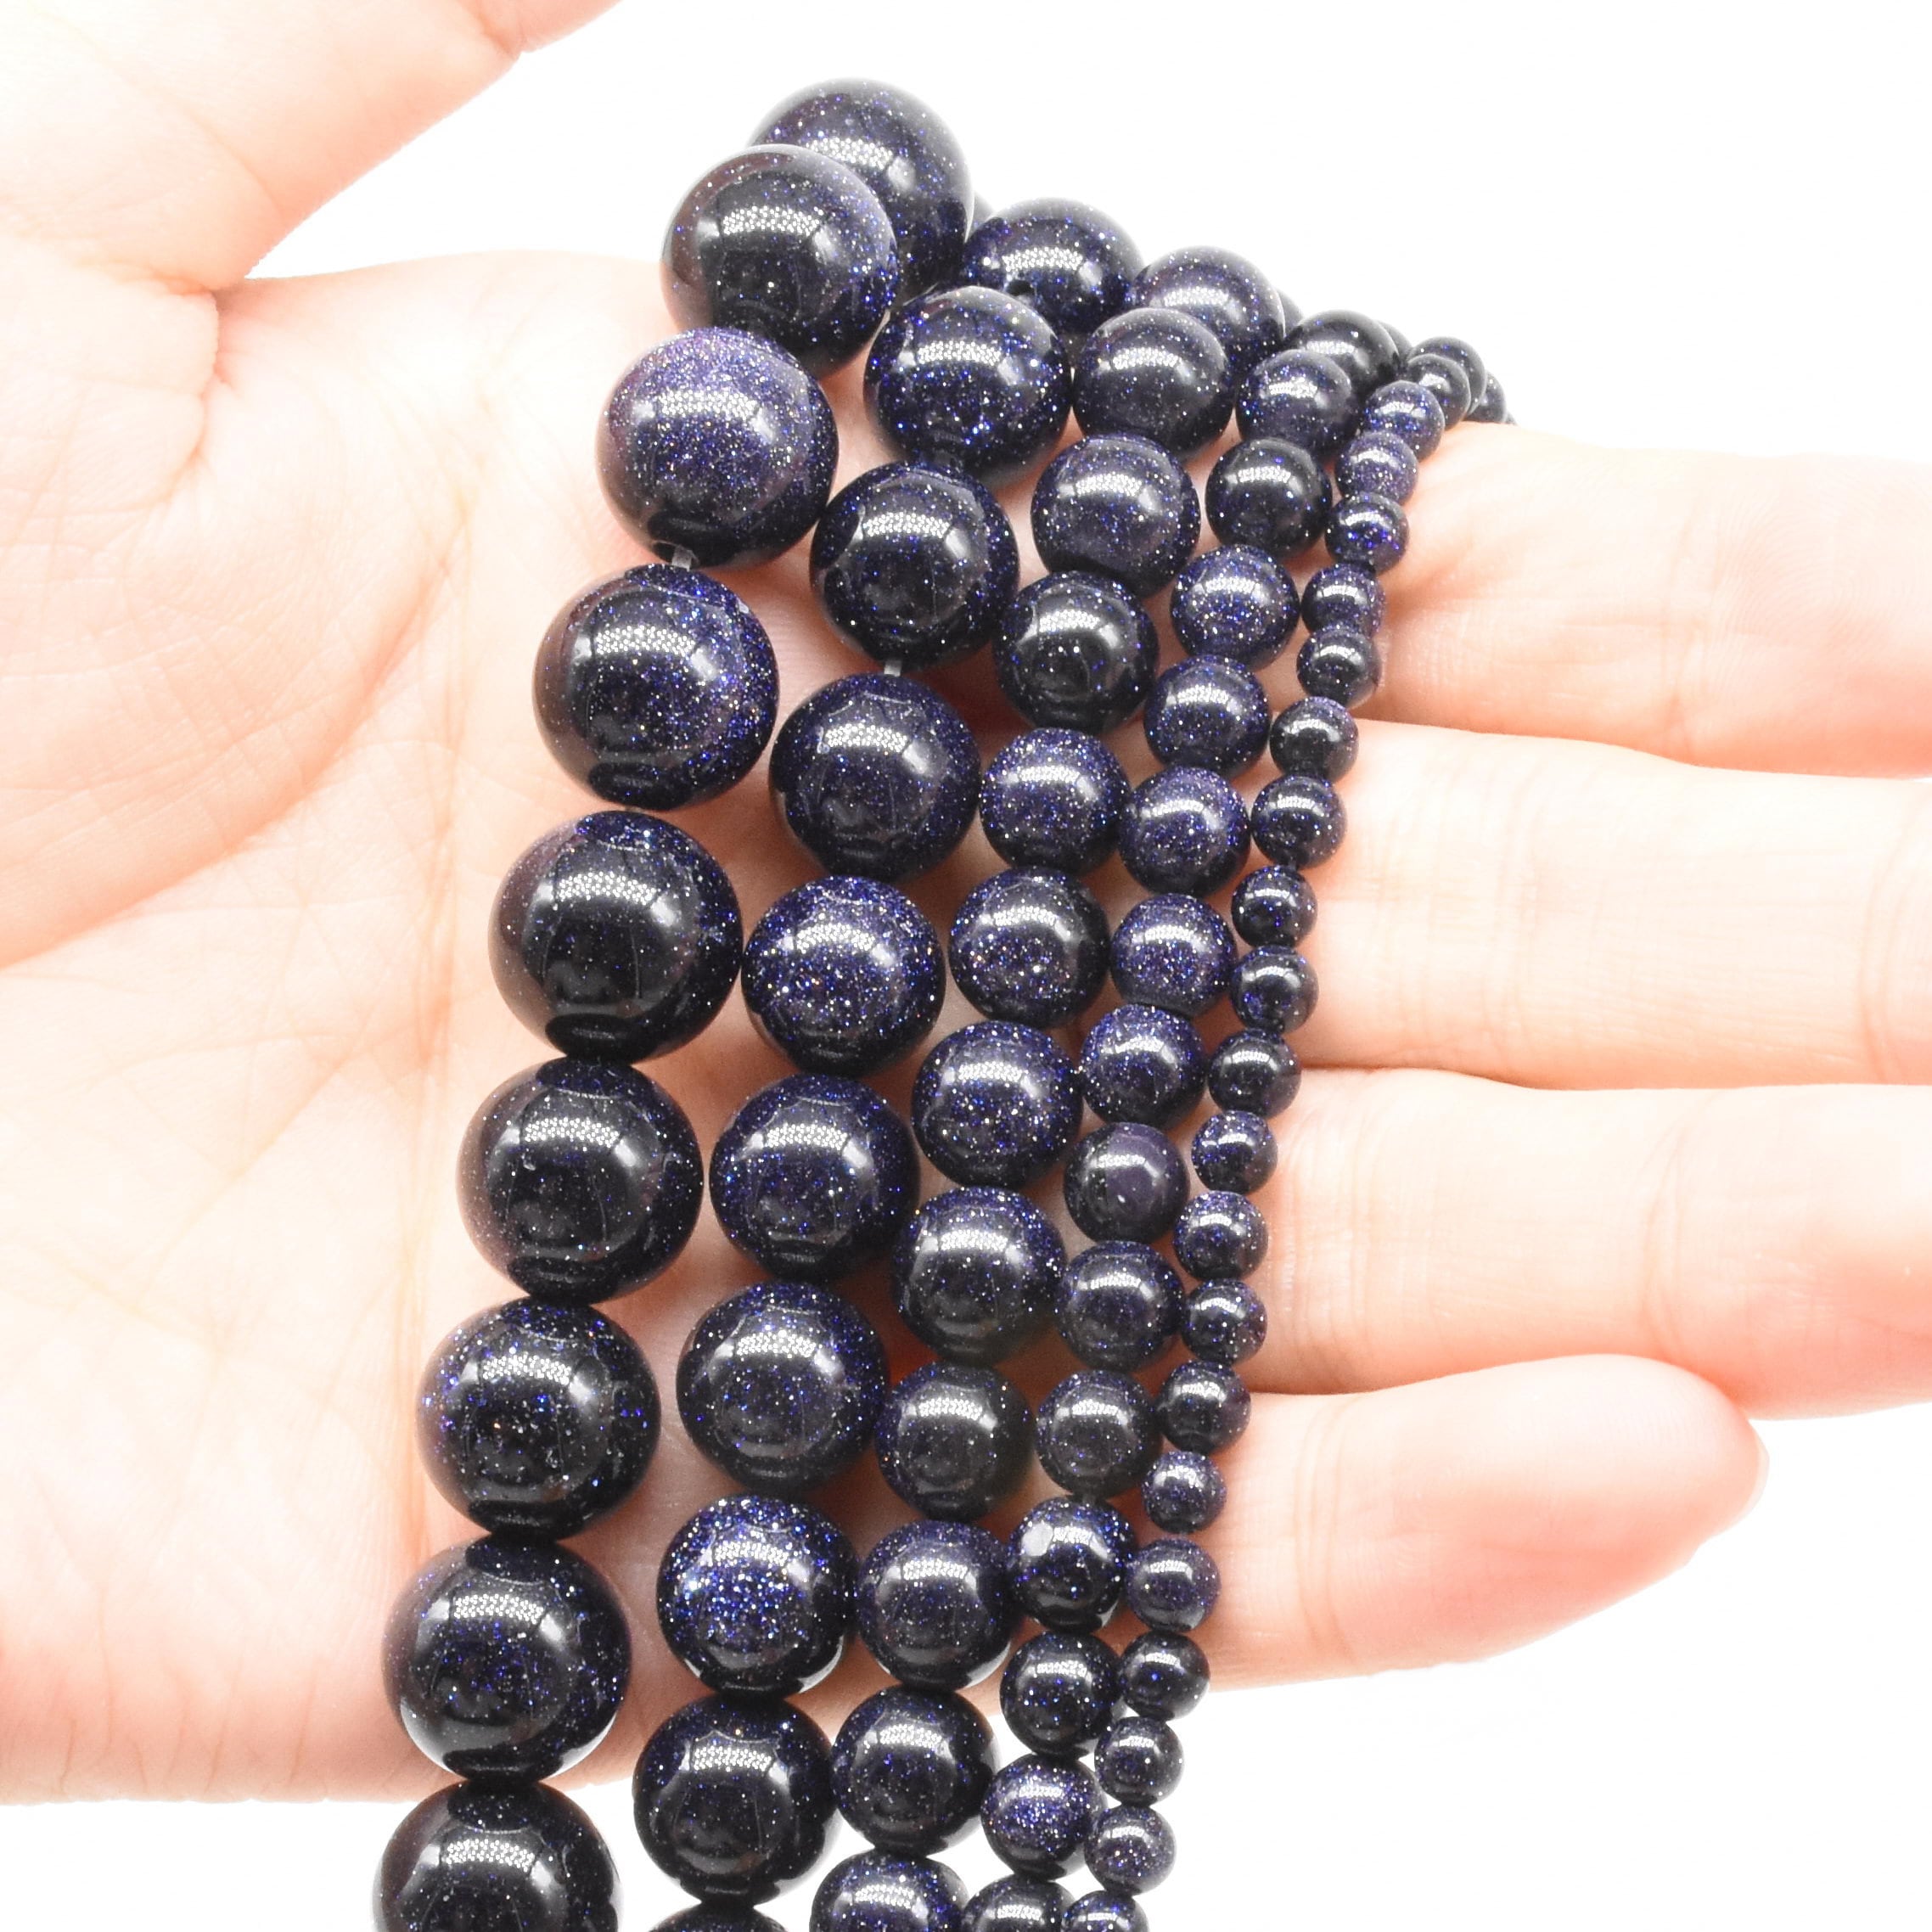 ICAI Beads 8mm Natural Blue Sand Goldstone Round Loose Stone Beads for Jewelry Making DIY Crafts Design 1 Strand 15 APPR.43-45pcs 